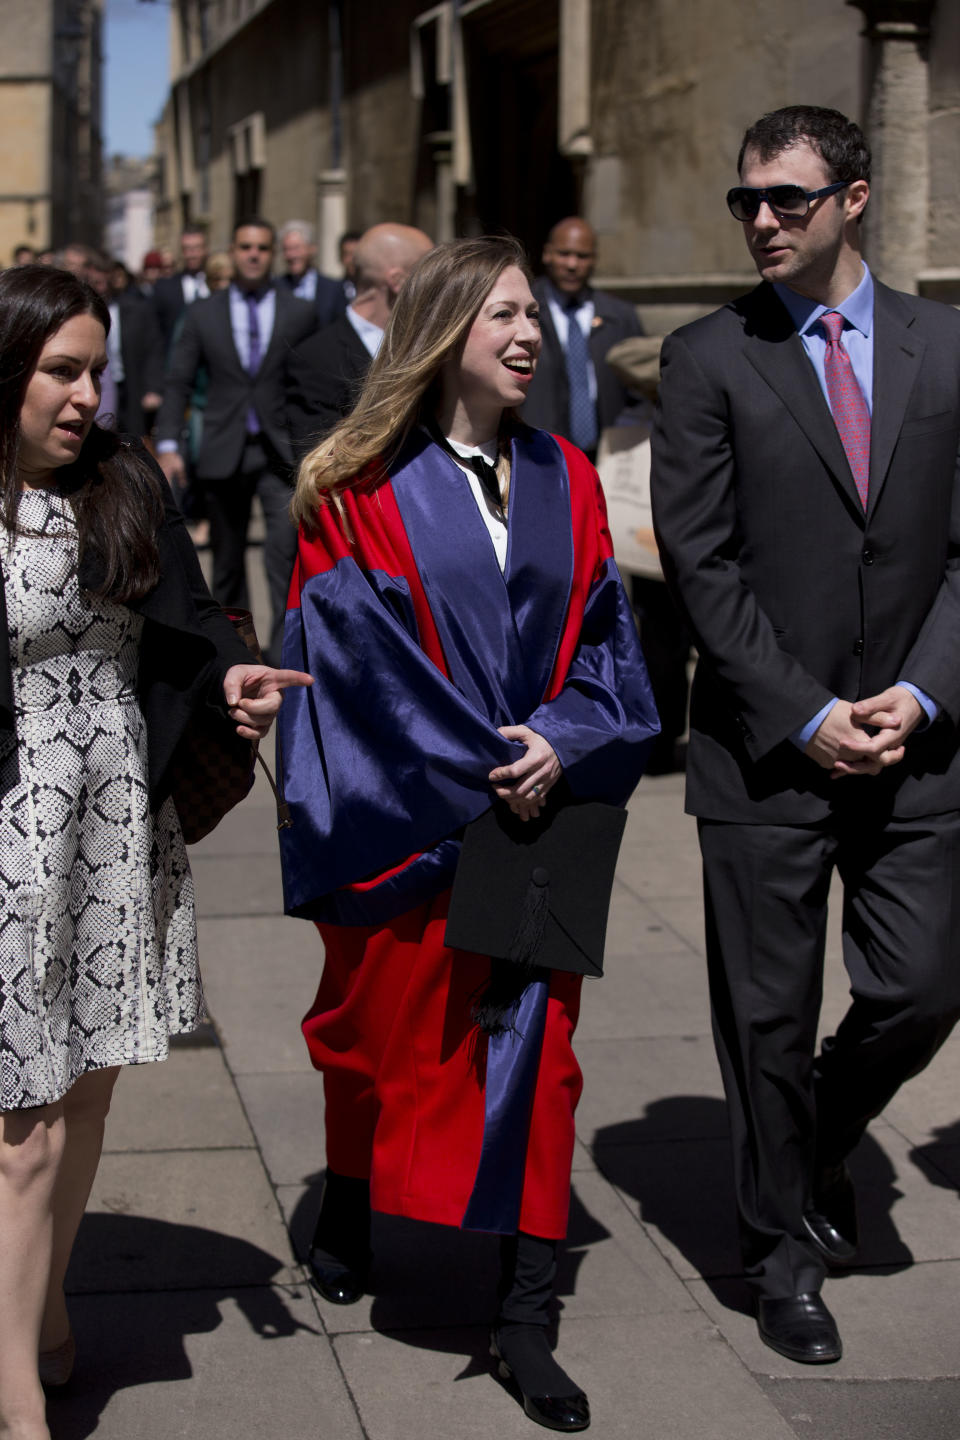 Chelsea Clinton, center, and her husband Marc Mezvinsky, right, walk away as her parents former U.S. President Bill Clinton and former Secretary of State Hillary Rodham Clinton follow behind, after they all attended Chelsea's Oxford University graduation ceremony at the Sheldonian Theatre in Oxford, England, Saturday, May 10, 2014. Chelsea Clinton received her doctorate degree in international relations on Saturday from the prestigious British university. Her father was a Rhodes scholar at Oxford from 1968 to 1970. The graduation ceremony comes as her mother is considering a potential 2016 presidential campaign. (AP Photo/Matt Dunham)